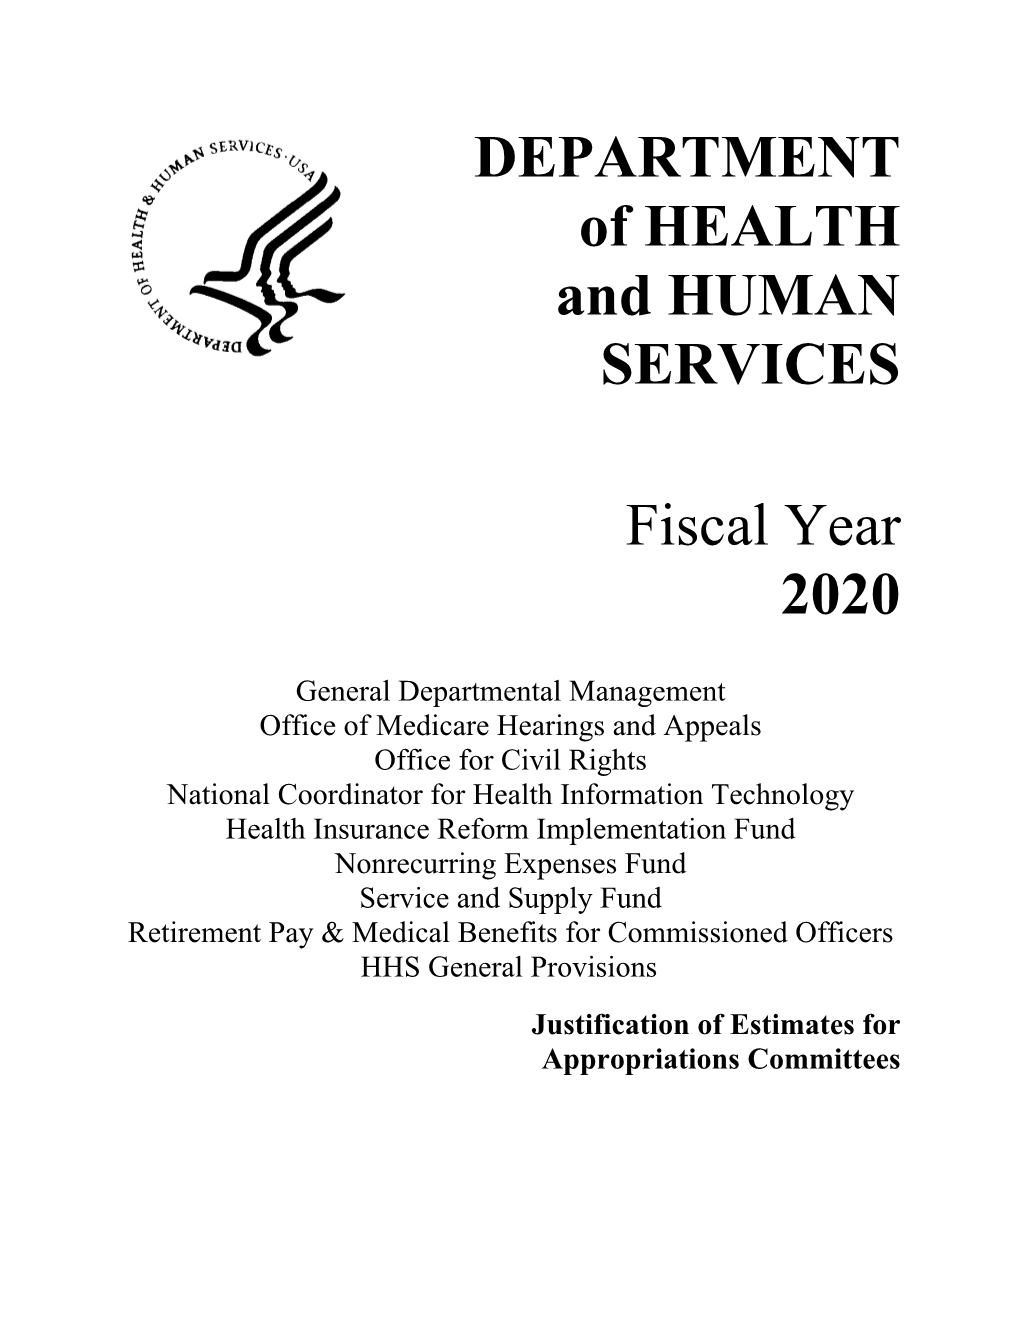 DEPARTMENT of HEALTH and HUMAN SERVICES Fiscal Year 2020